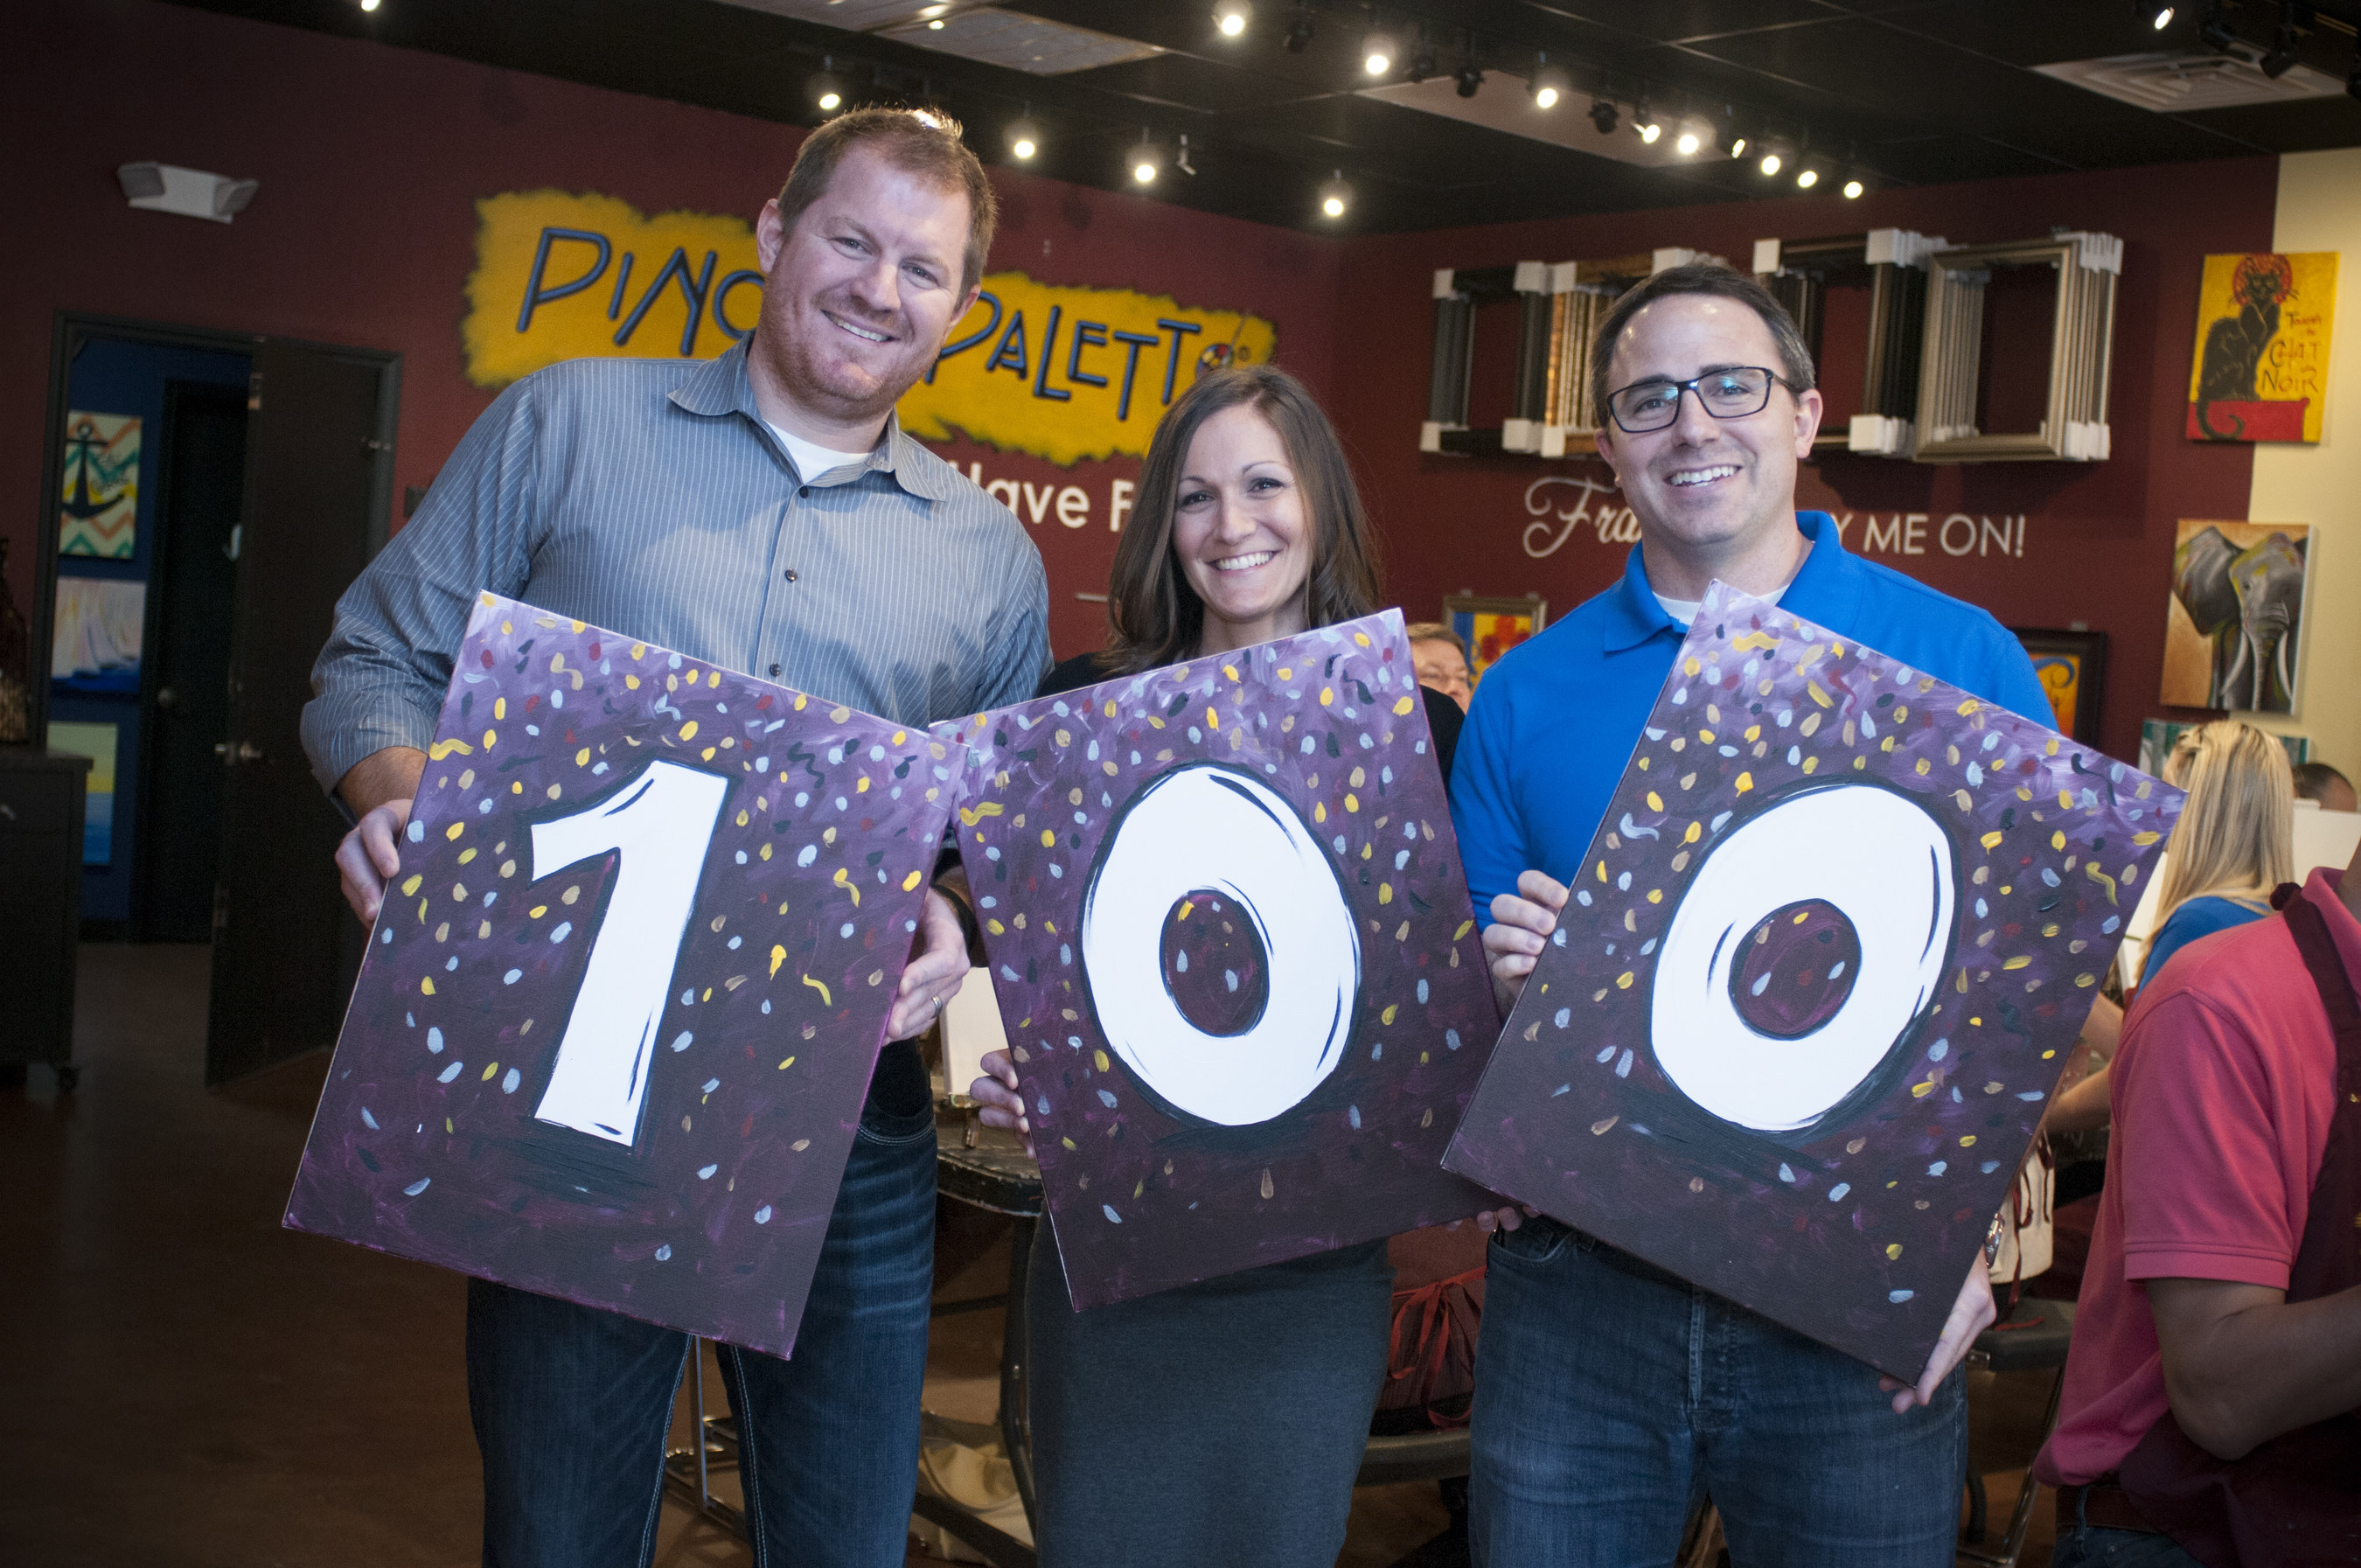 Pinot's Palette co-founders Charles Willis, Beth Willis and Craig Ceccanti celebrate their 100th studio signing.